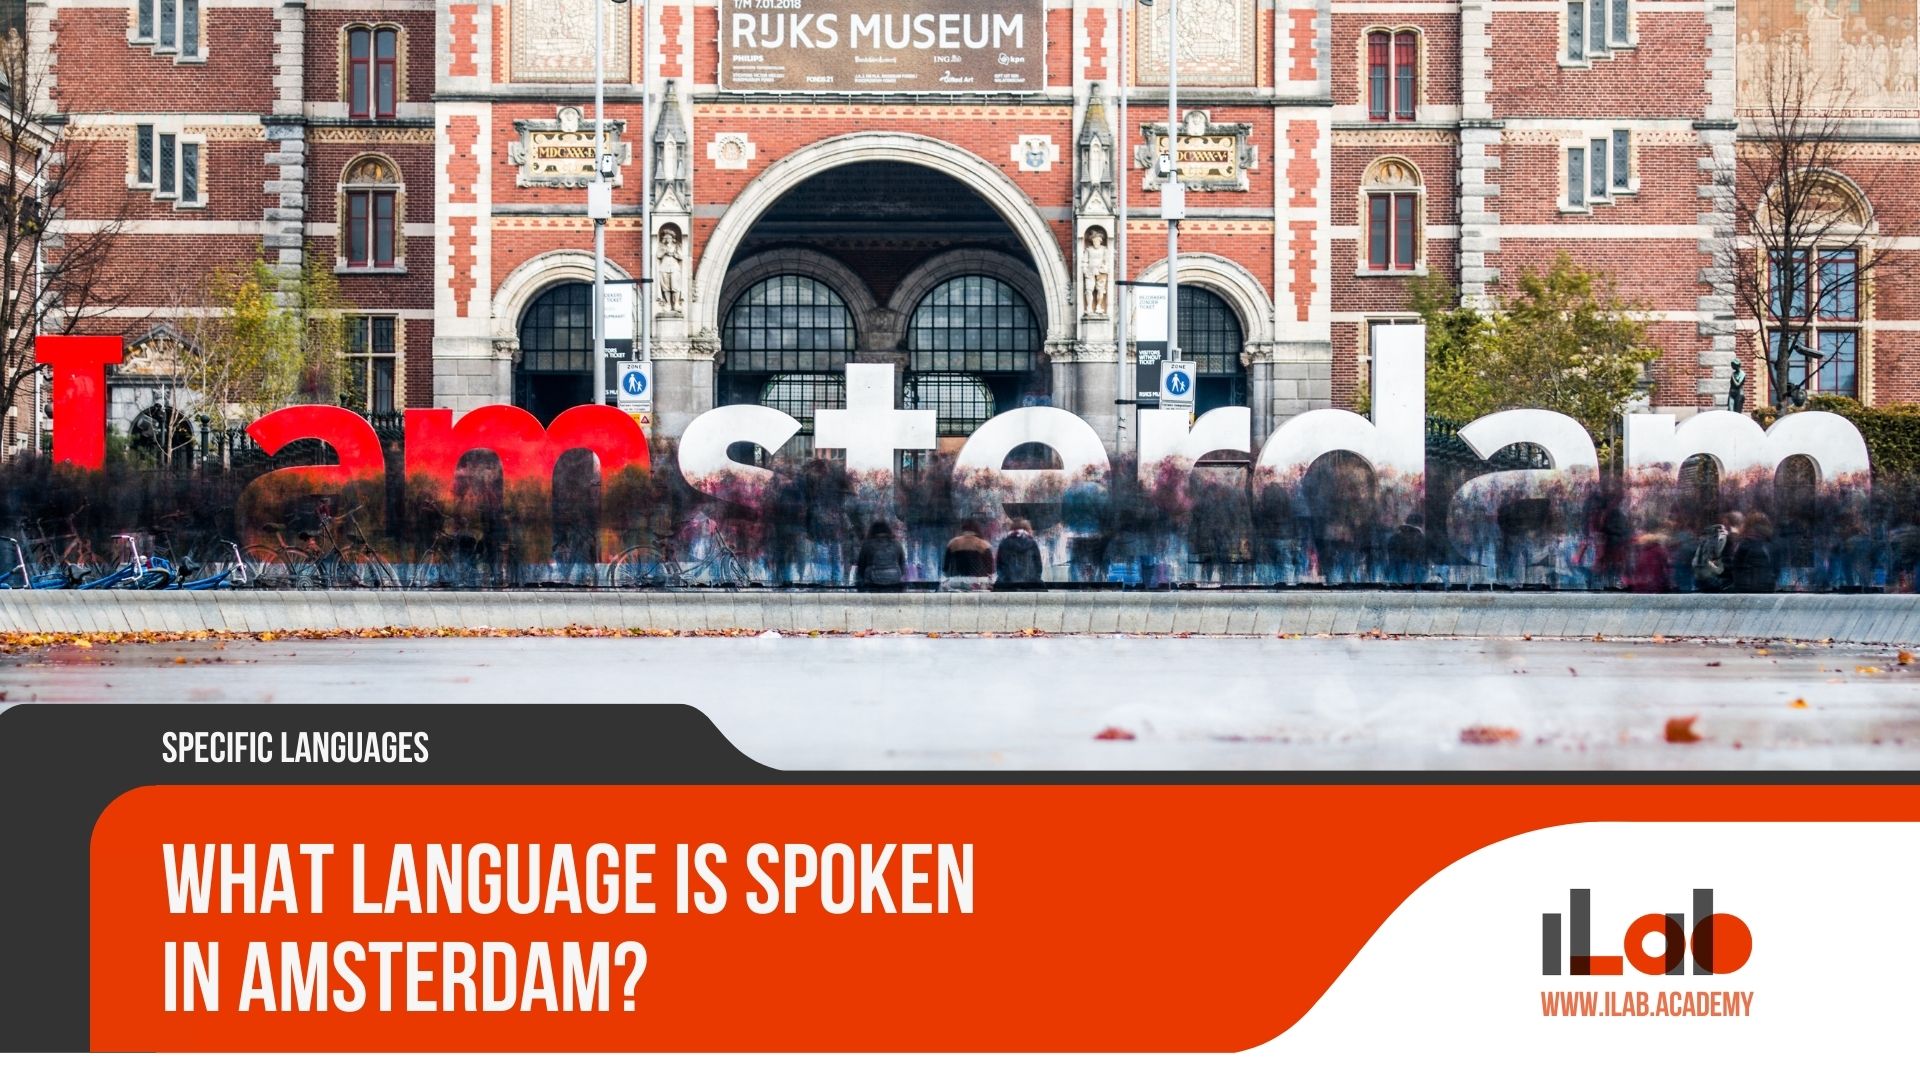 What Language Is Spoken in Amsterdam?